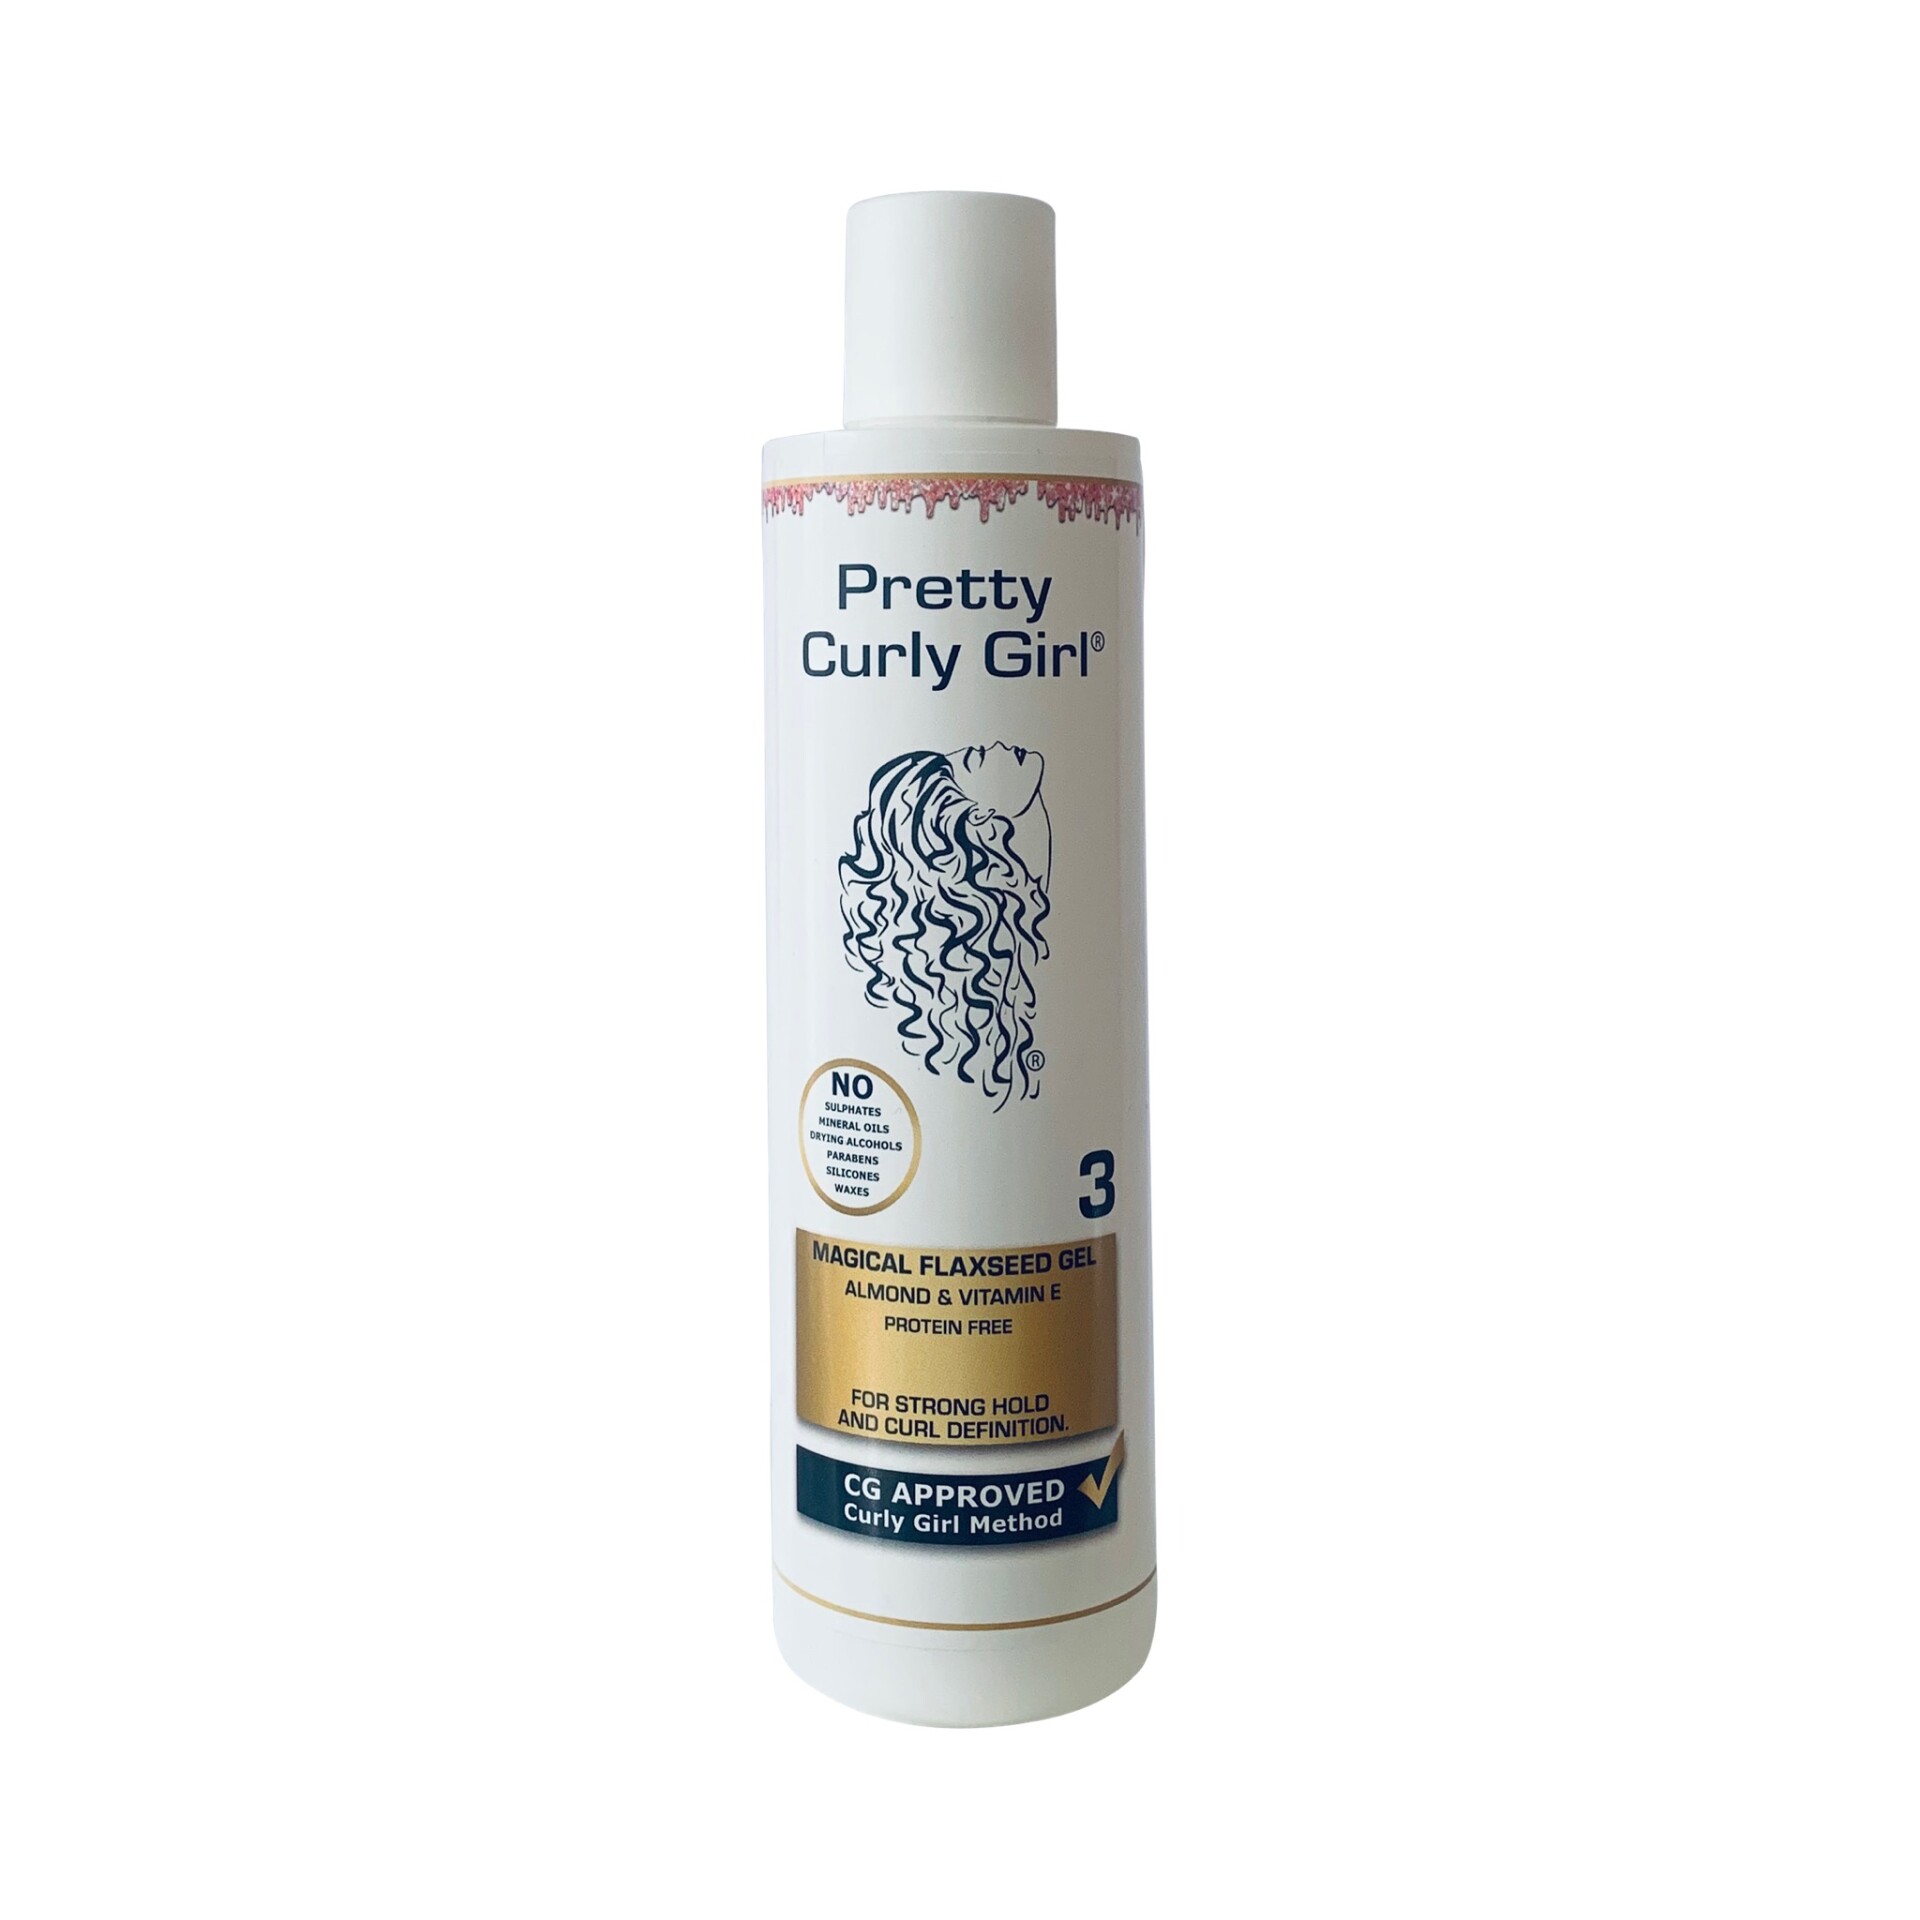 Pretty Curly Girl - Flaxseed gel - The Proof